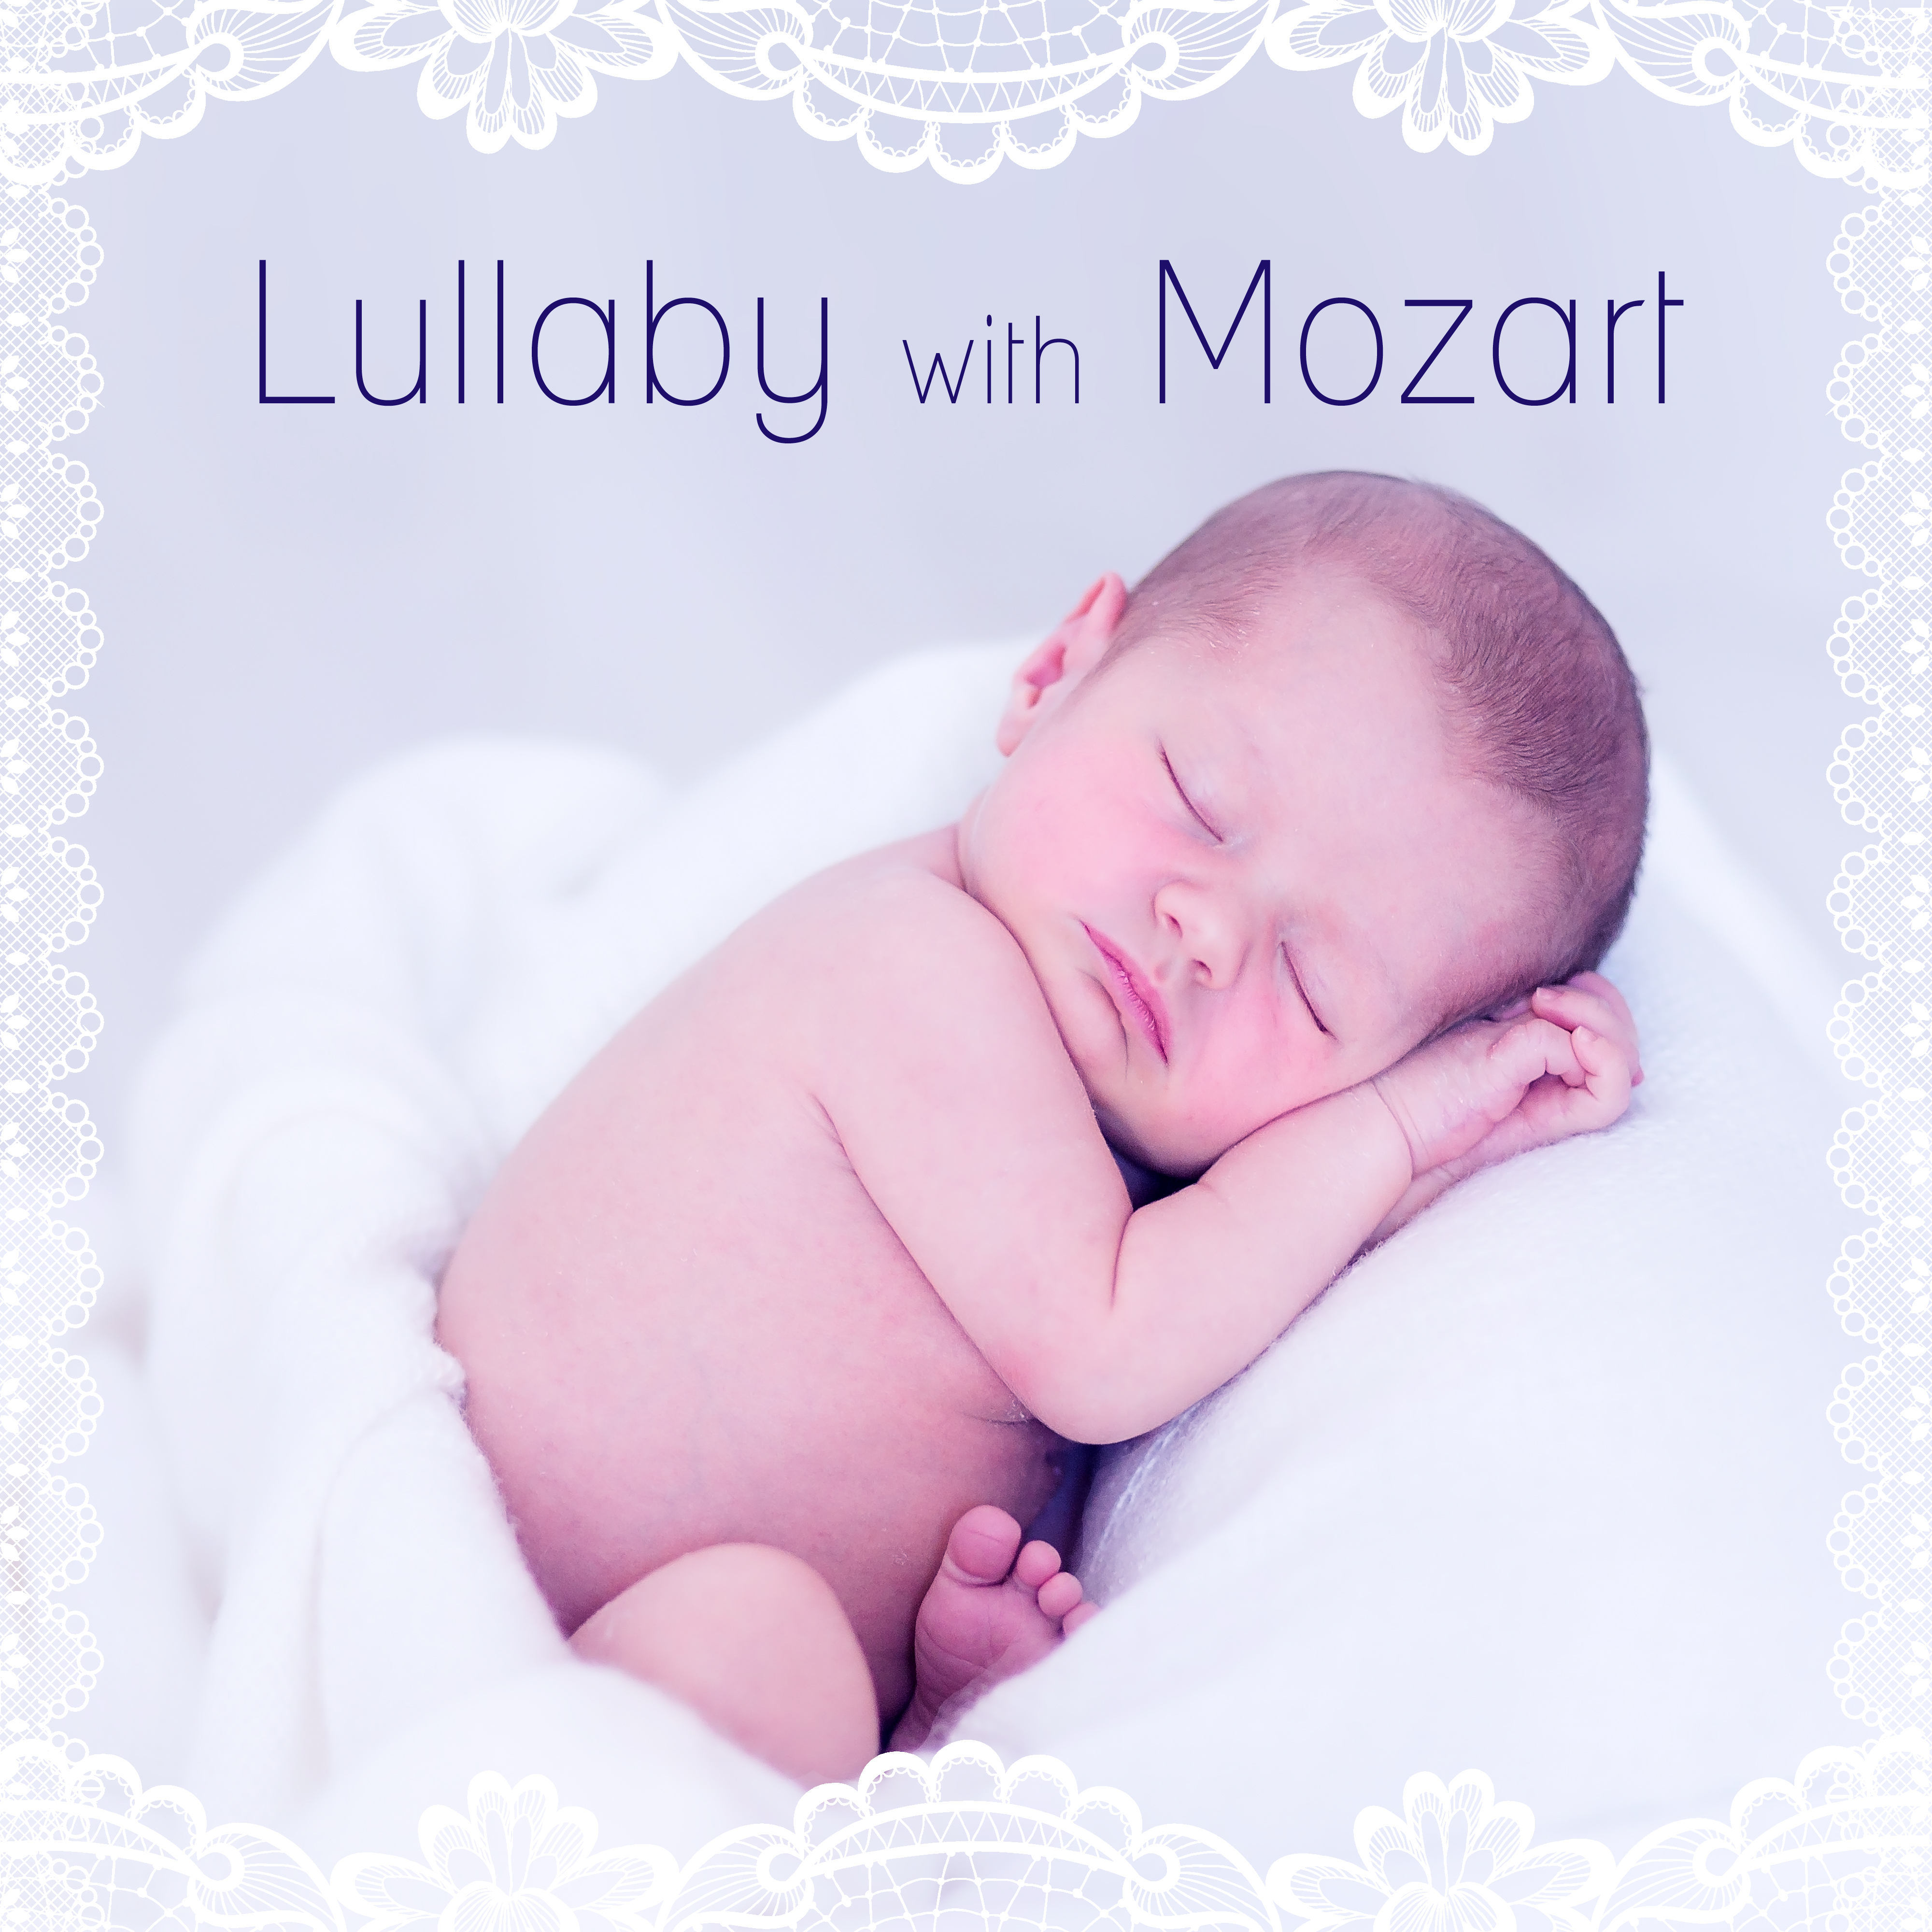 Lullaby with Mozart  Songs to Sleep, Quiet Songs for Babies, Gentle Sounds